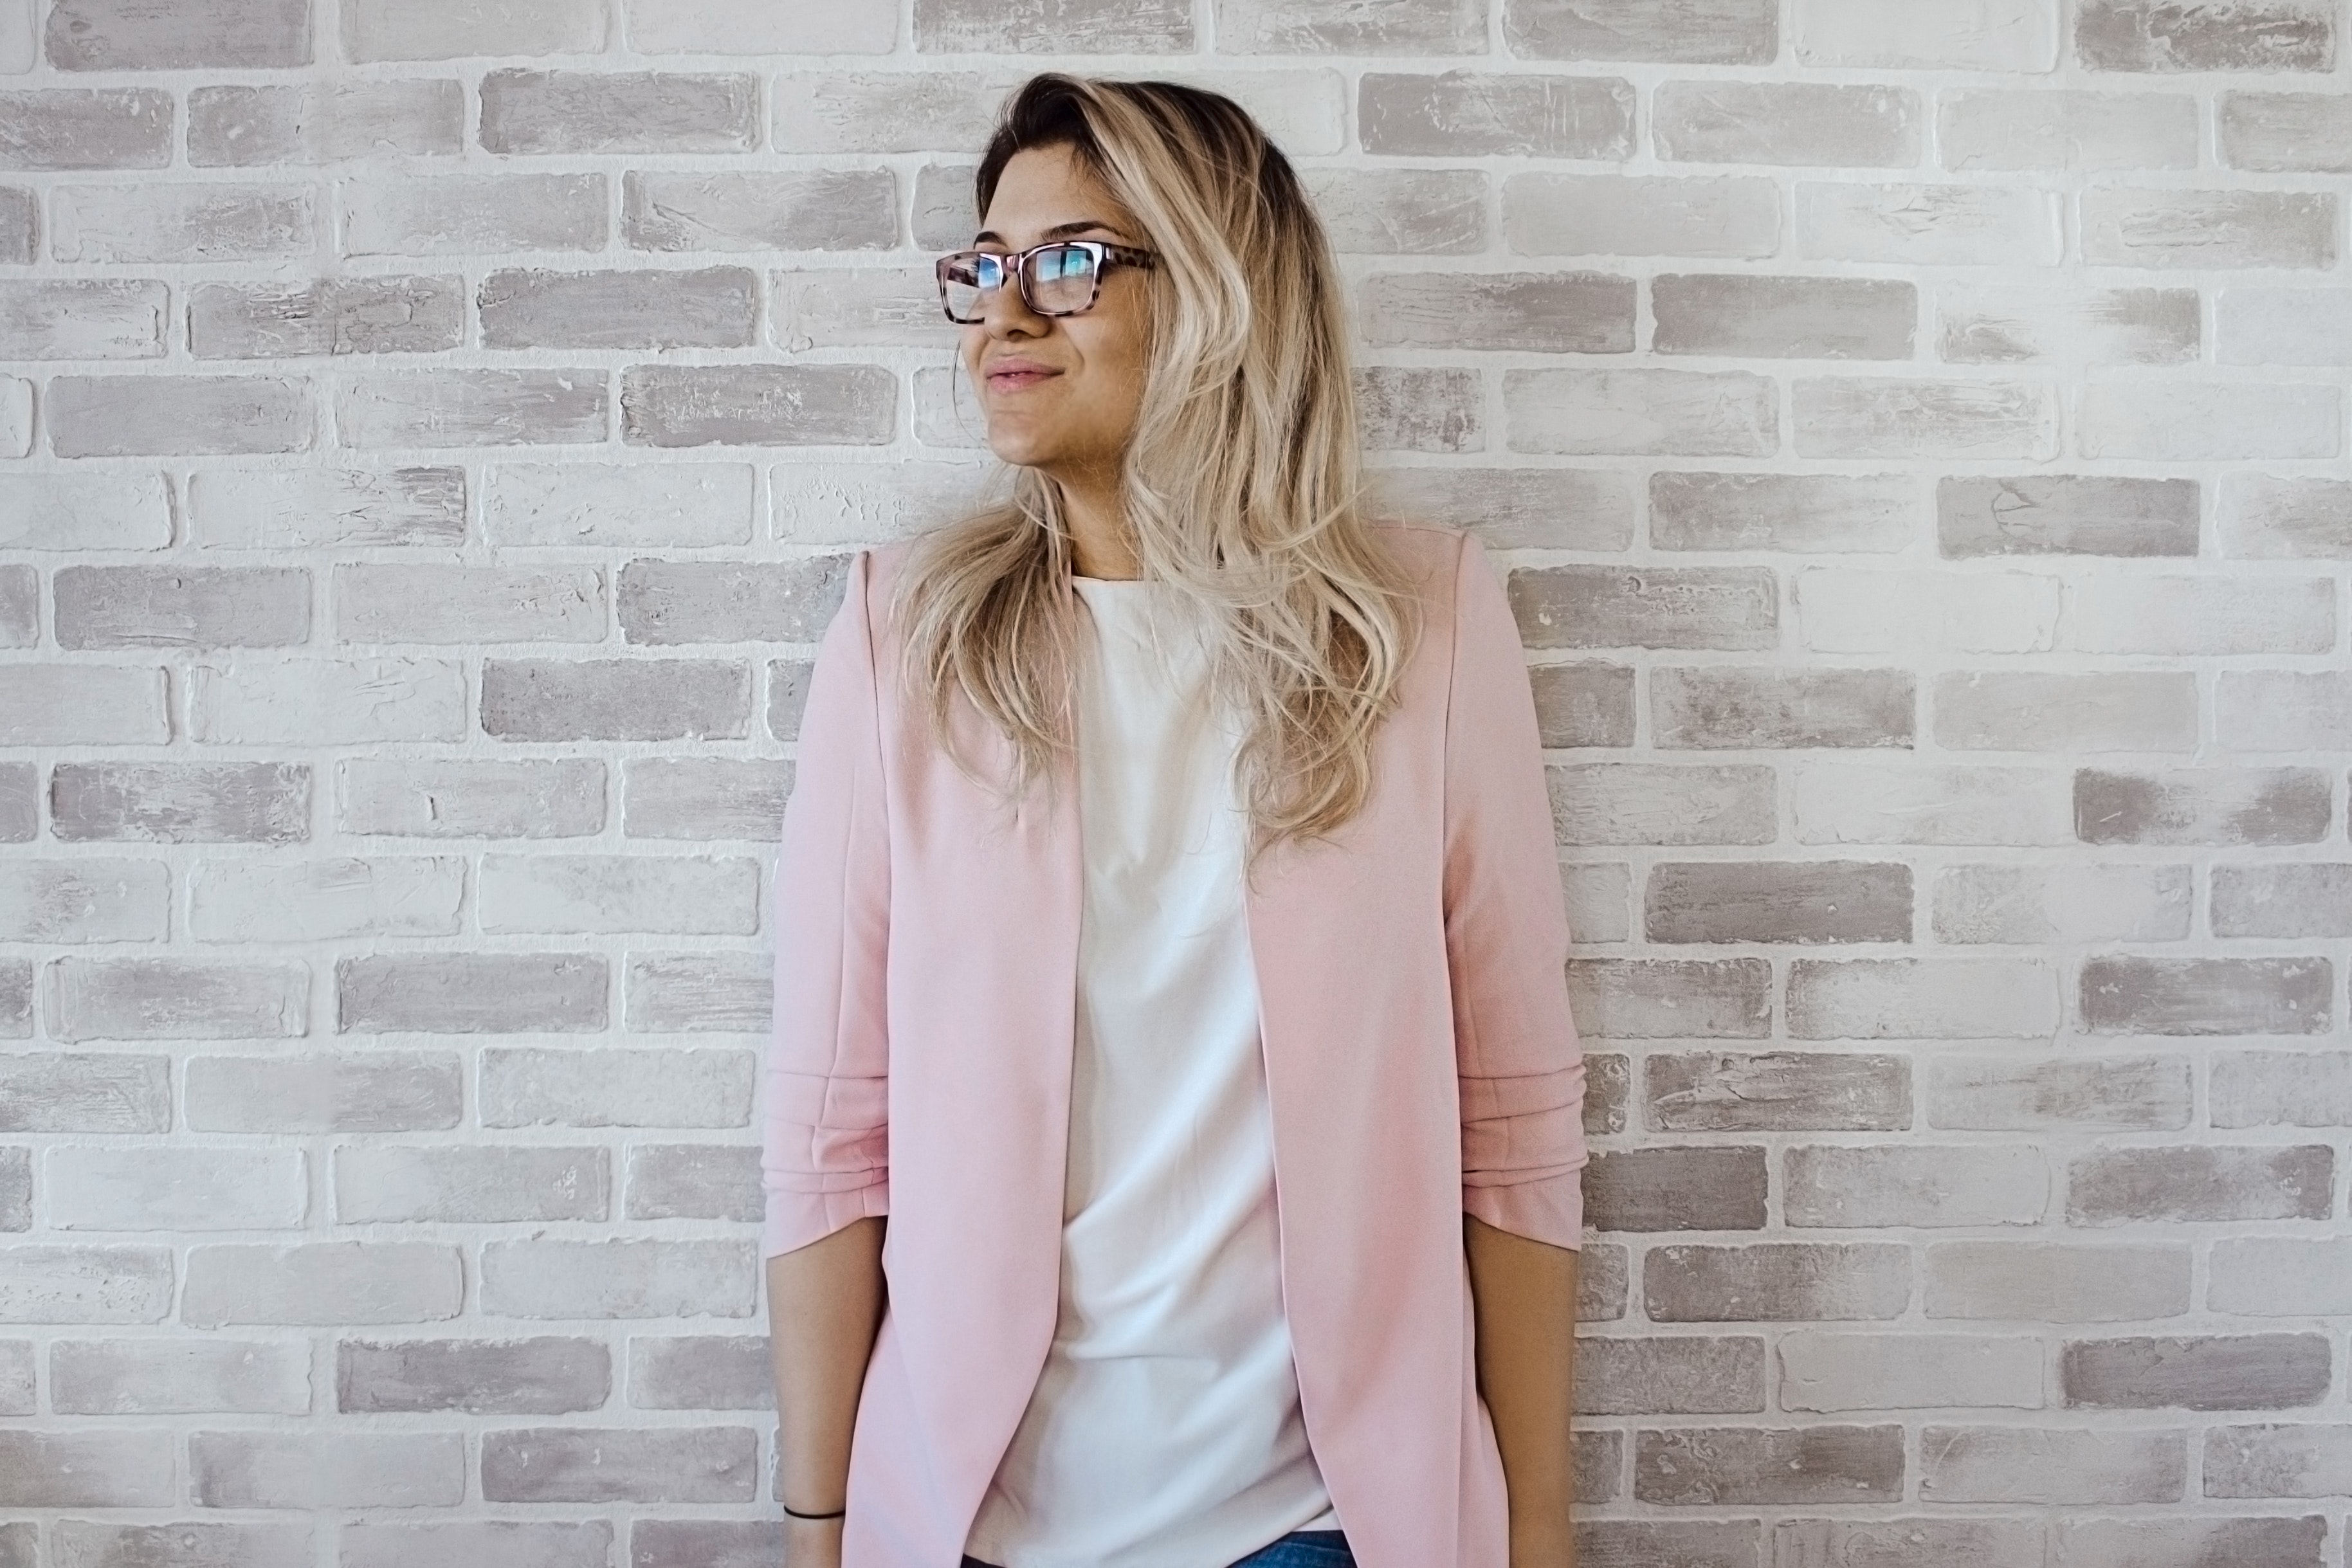 Woman in Pink Cardigan and White Shirt Leaning on the Wall, Beautiful, Girl, Wear, Wall, HQ Photo